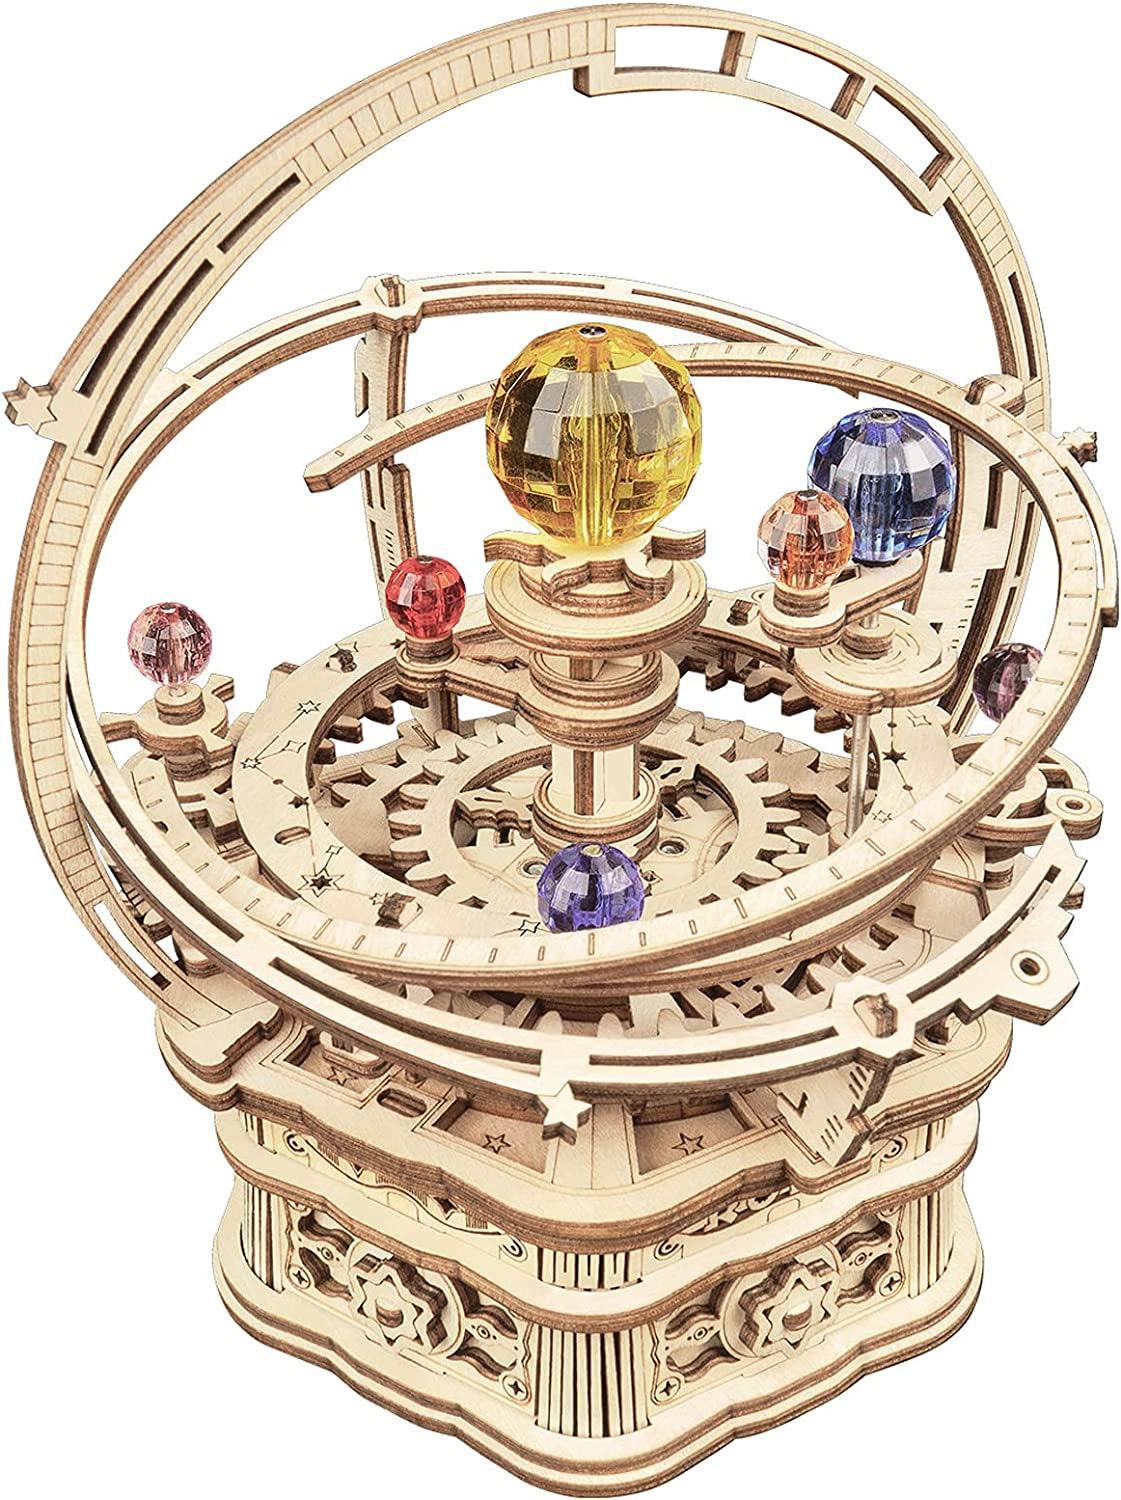 3D Wooden Puzzles for Adults Mechanical Music Box-Starry Night, DIY Rotating Music Box Model Building Kits - WoodArtSupply